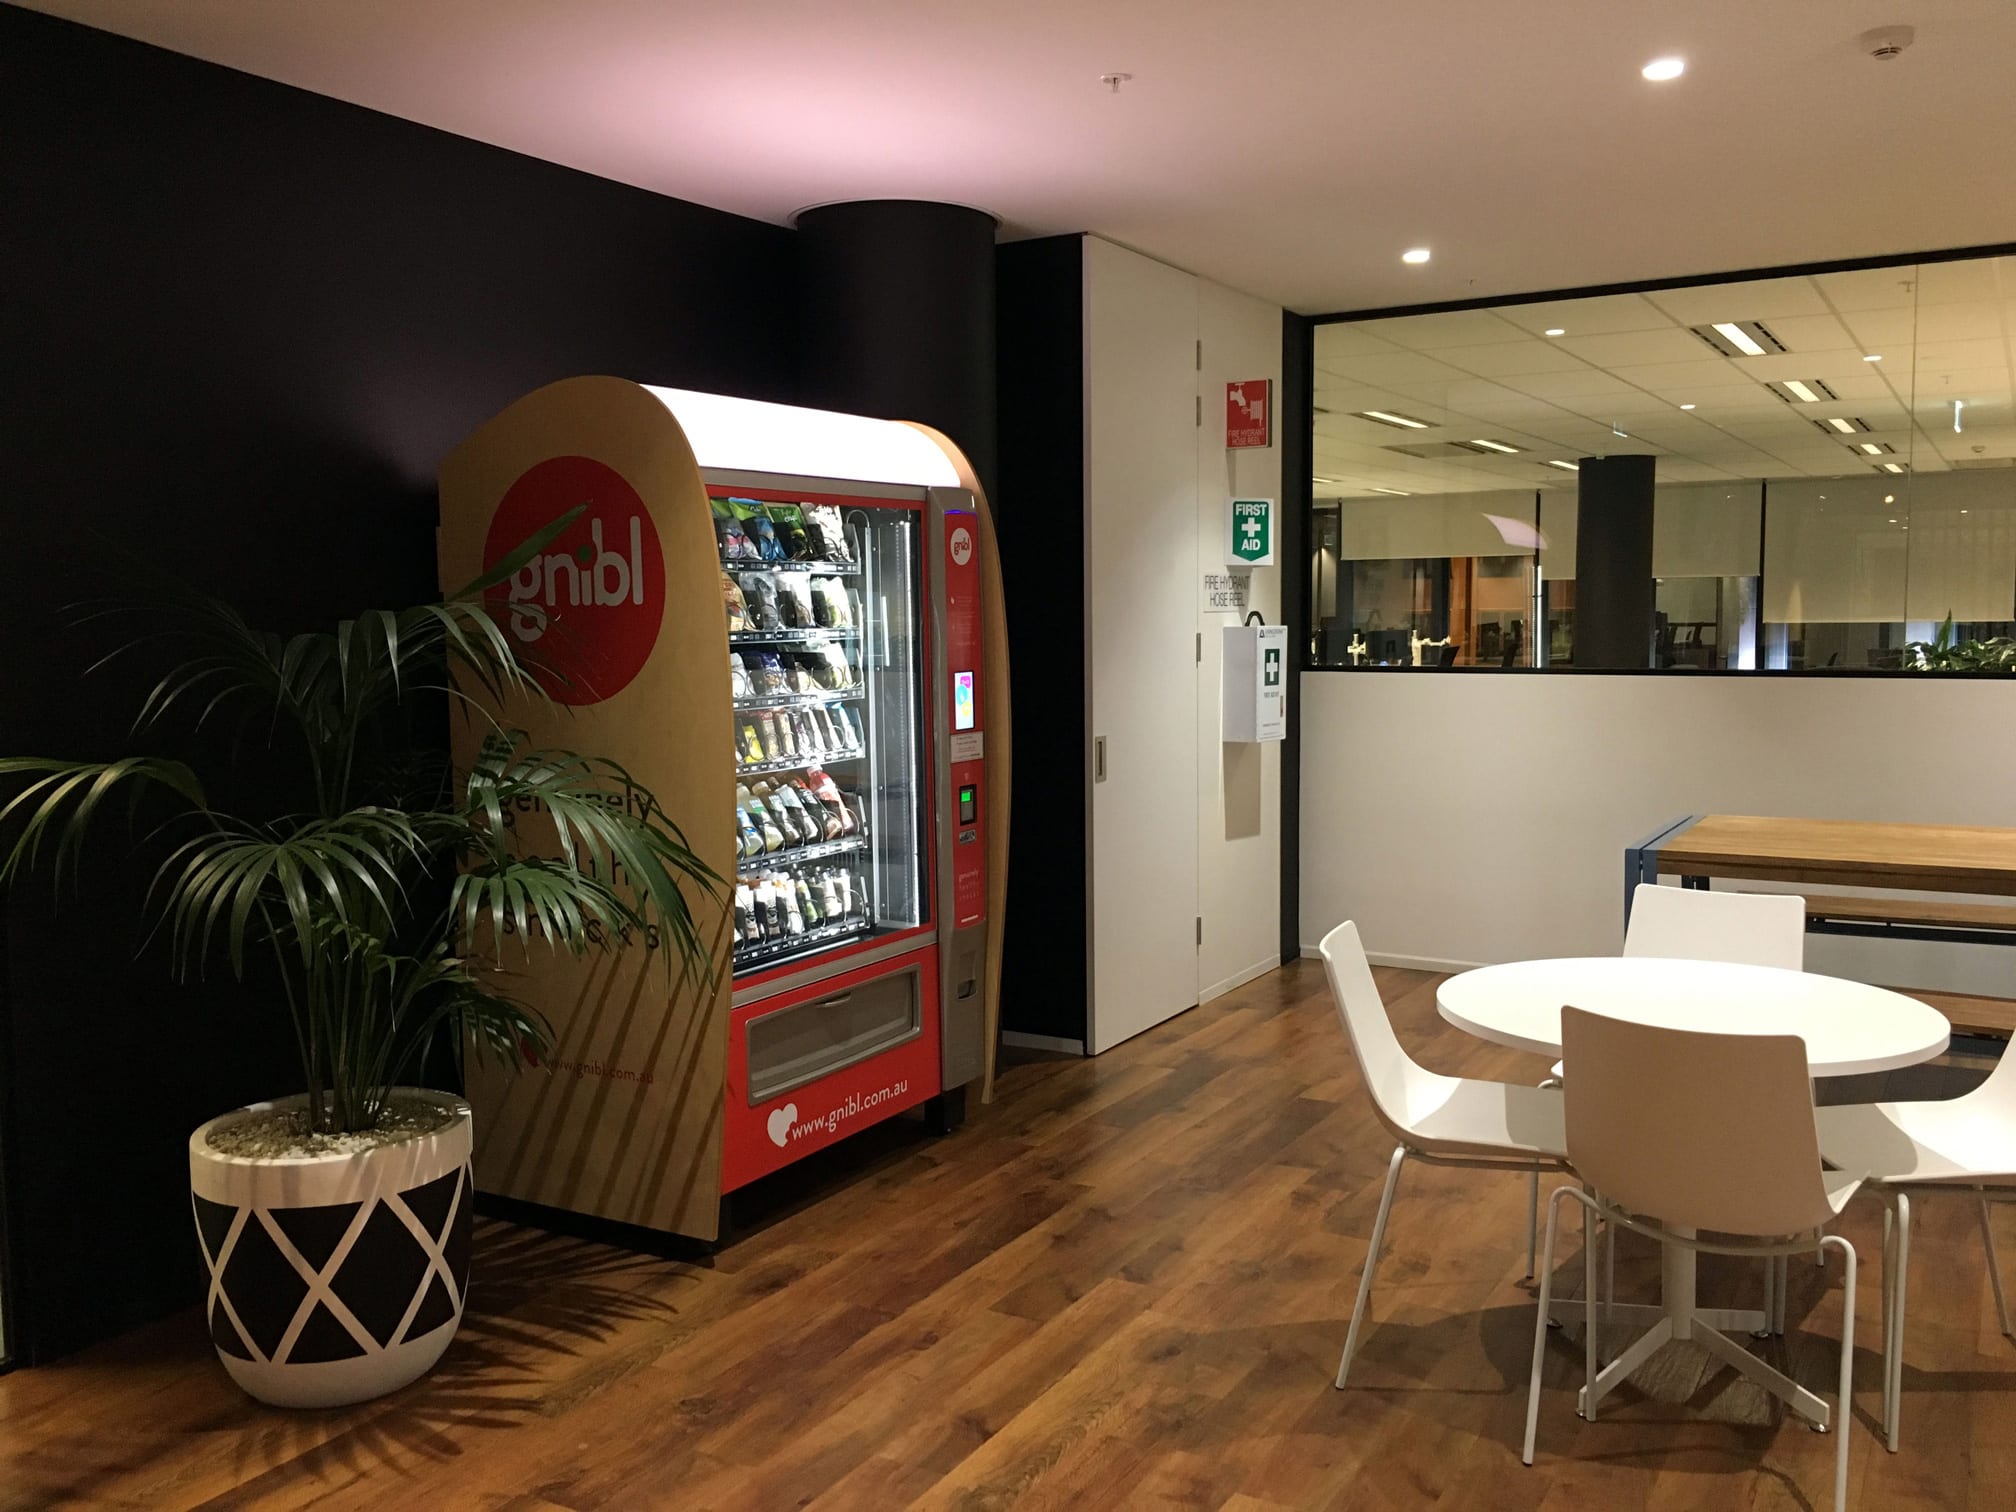 Gnibl Vending machine placed in an office environment with indoor plants, tables, and seating.